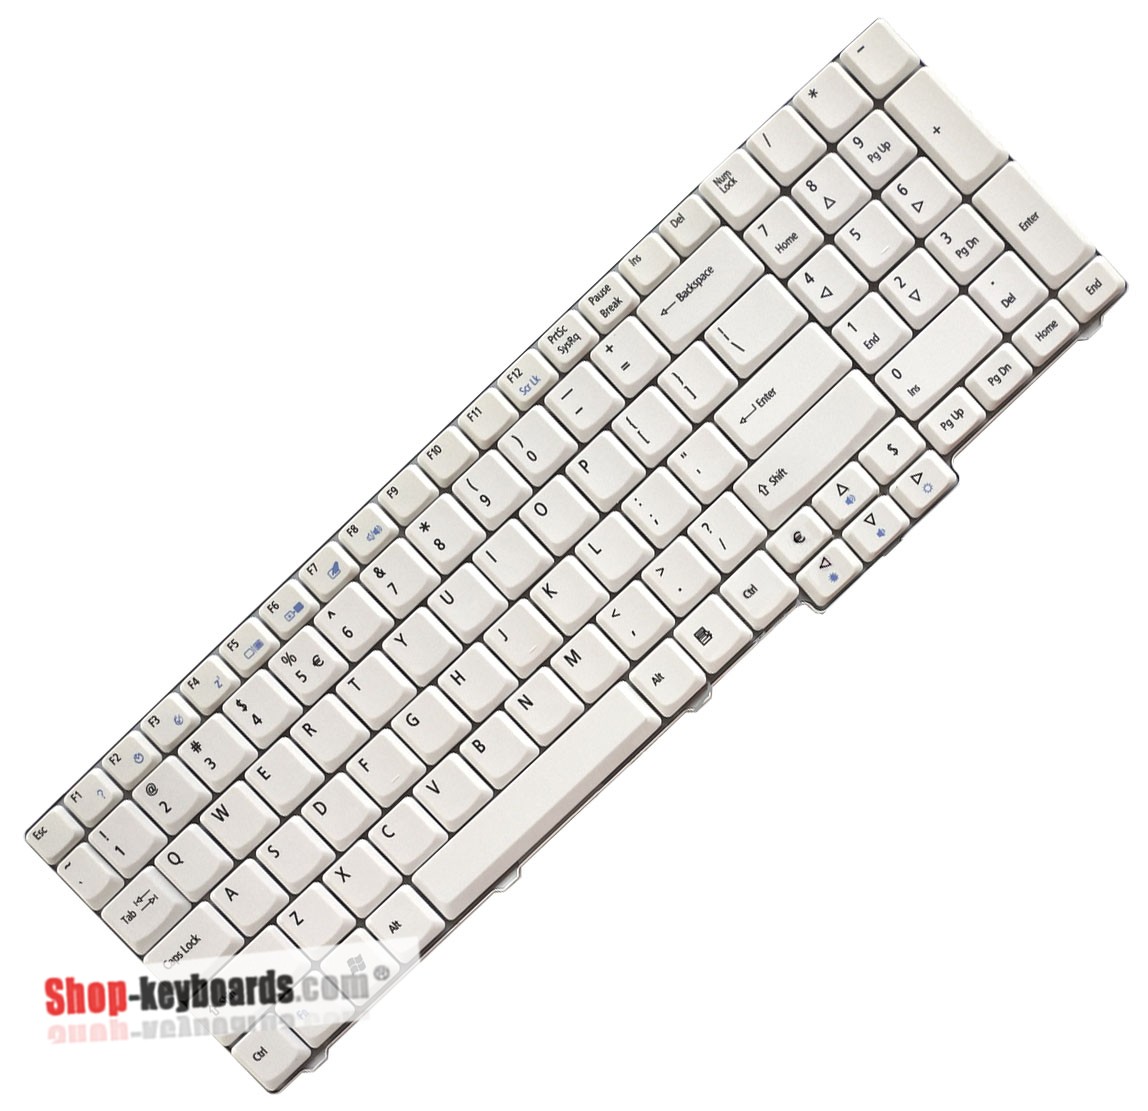 Acer Aspire 7720G-5A3G25Mi Keyboard replacement